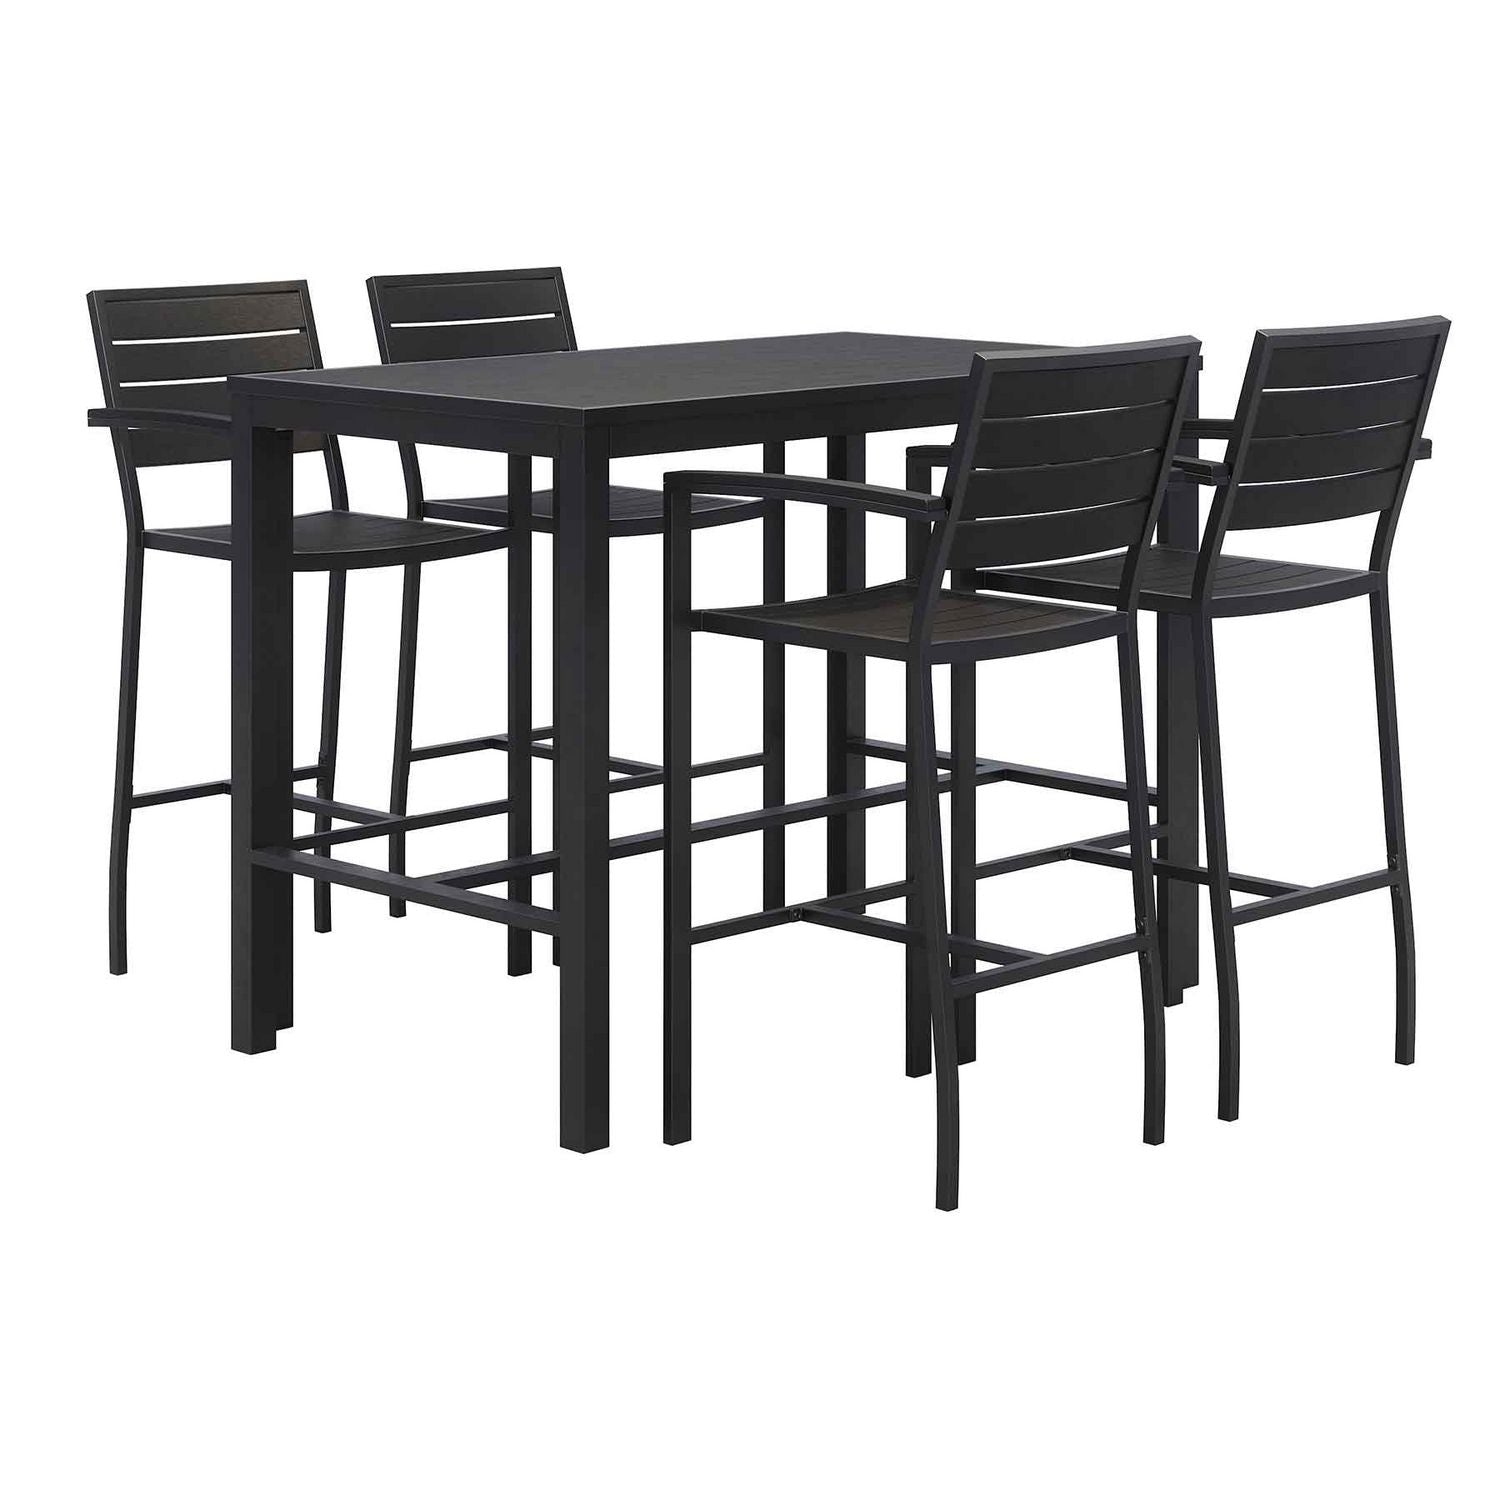 eveleen-outdoor-bistro-patio-table-with-four-black-powder-coated-polymer-barstools-32-x-55-black-ships-in-4-6-bus-days_kfi840031925213 - 1